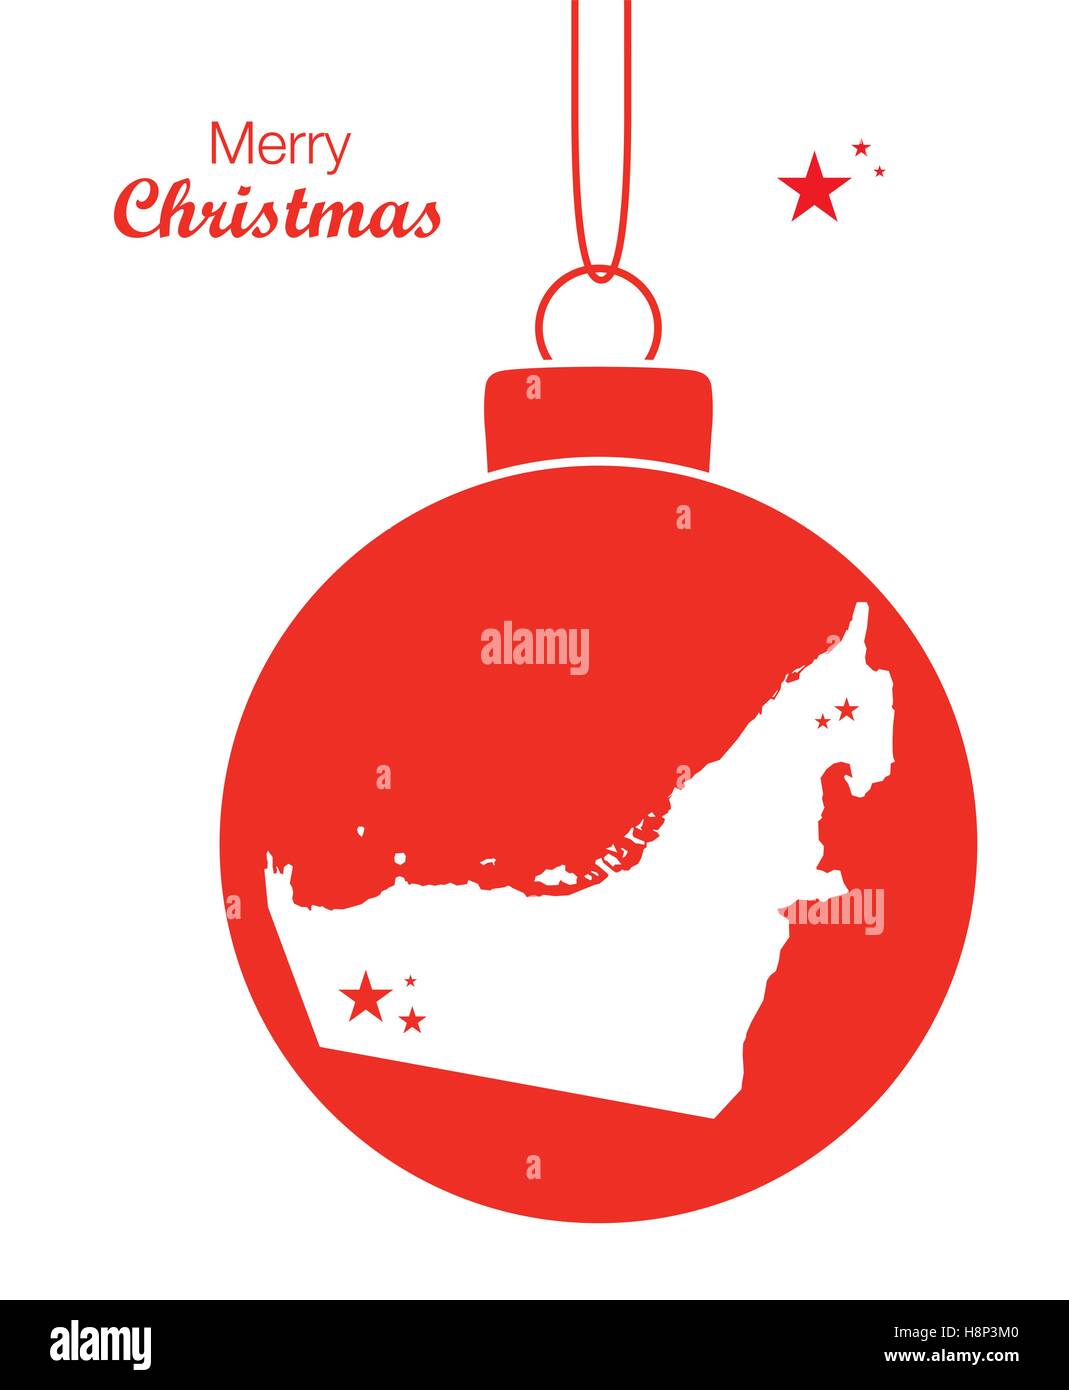 Merry Christmas illustration theme with map of the United Arab Emirates Stock Vector